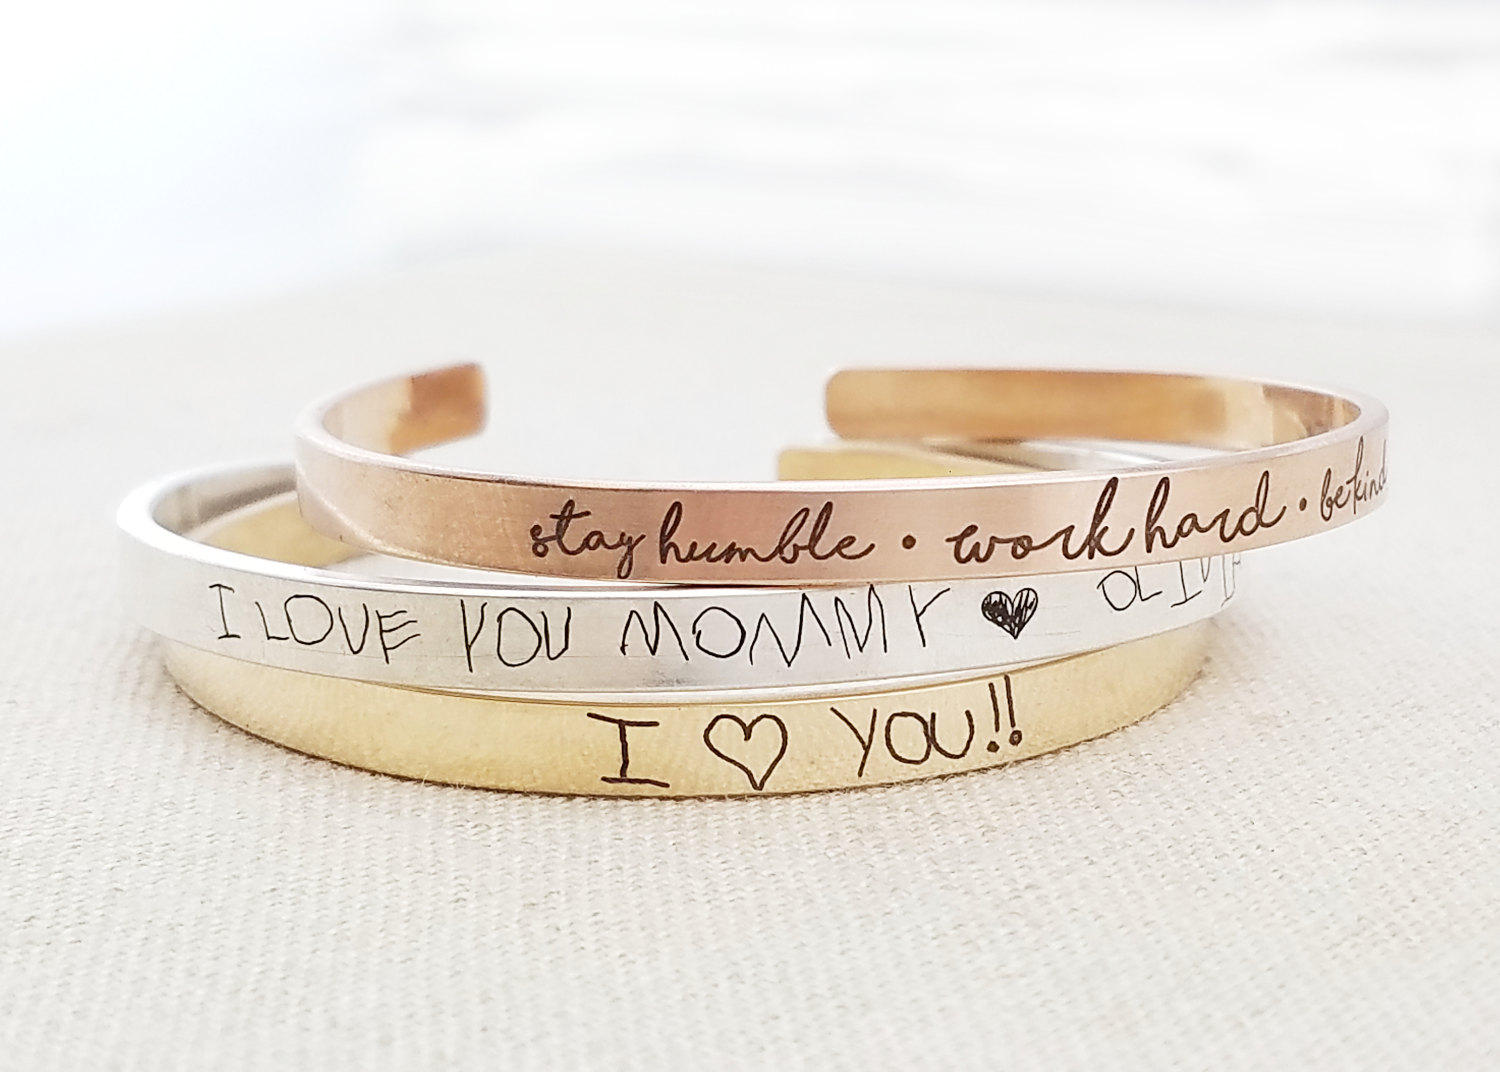 Mother's Day personalized gifts for grandmothers: Personalized cuff at Emily J Design